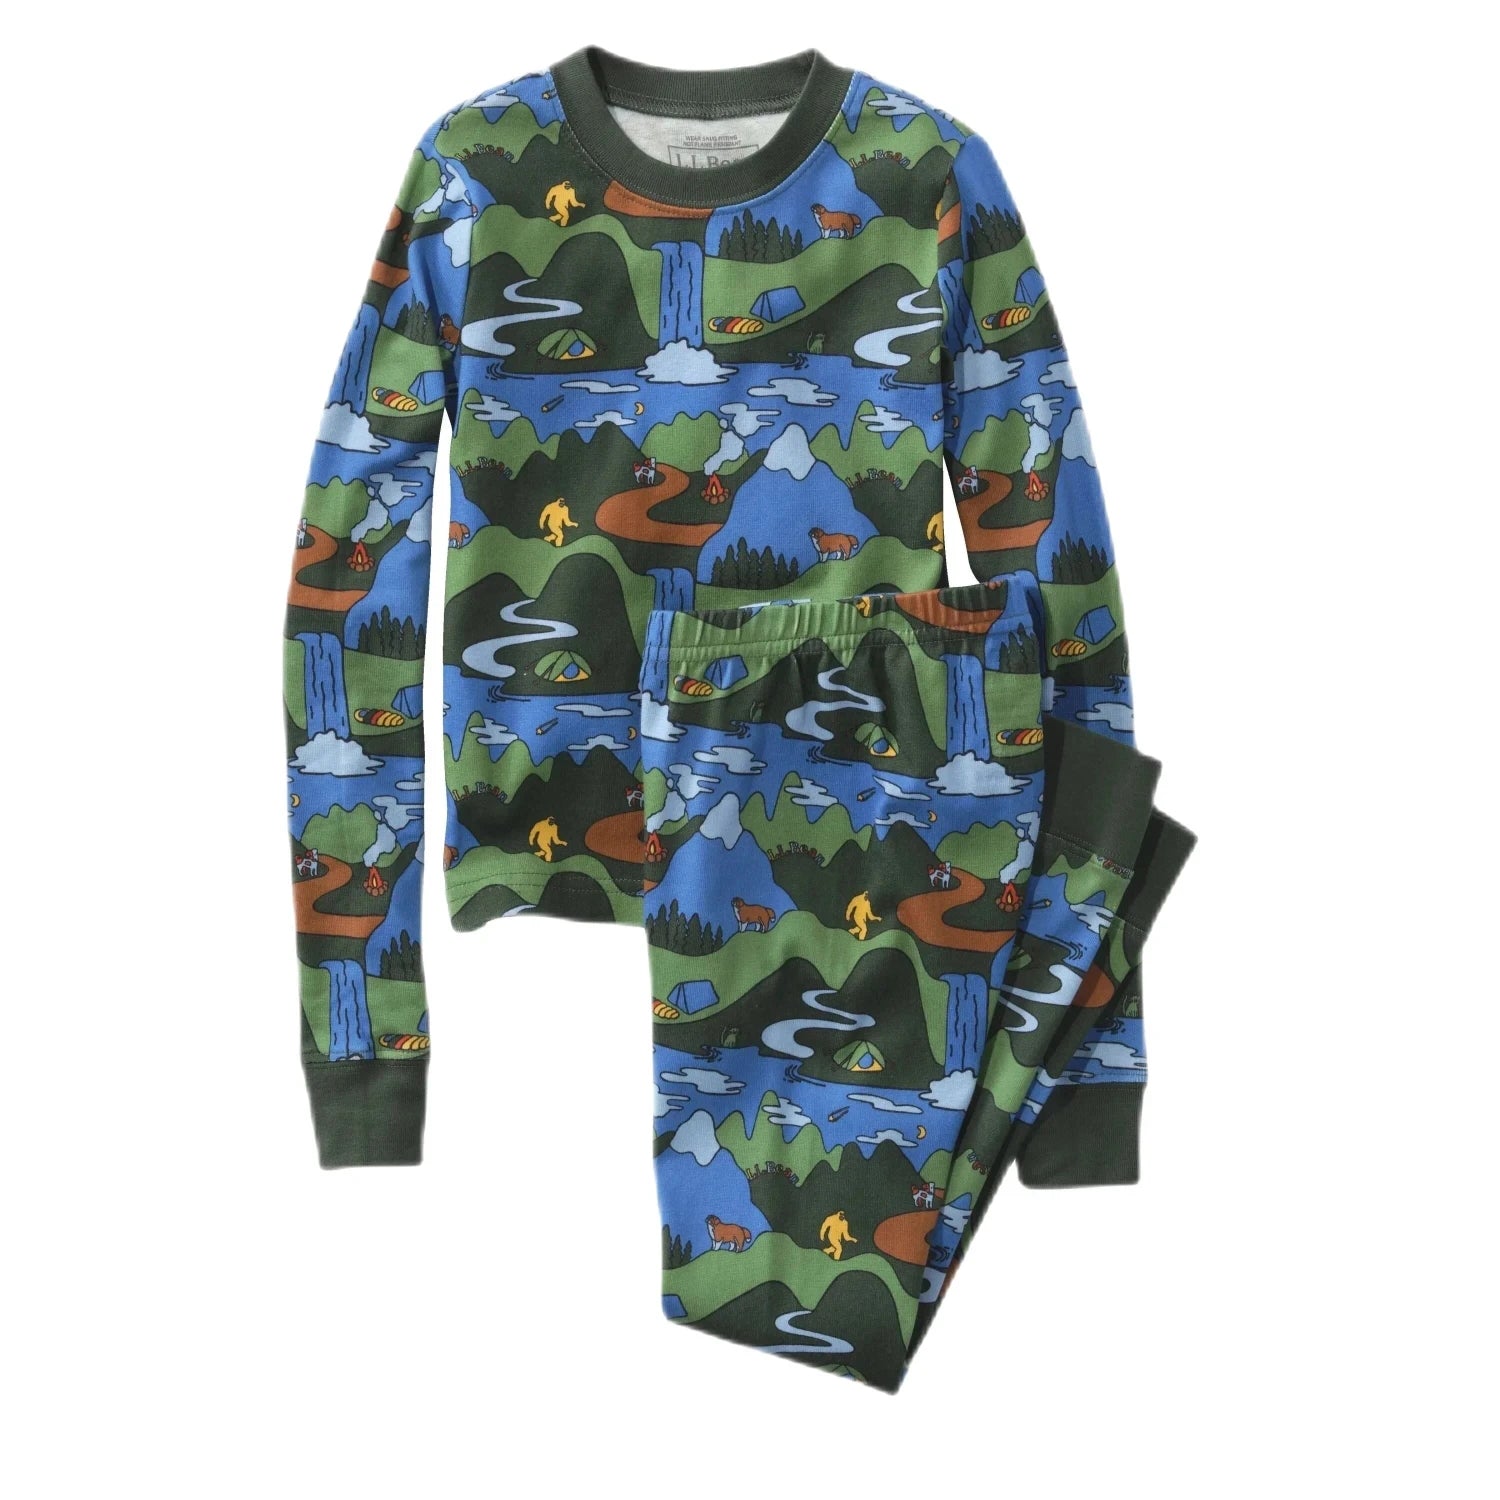 LL Bean Kid's Organic Cotton Fitted Pajamas shown in the Deep Green Landscape, front view.